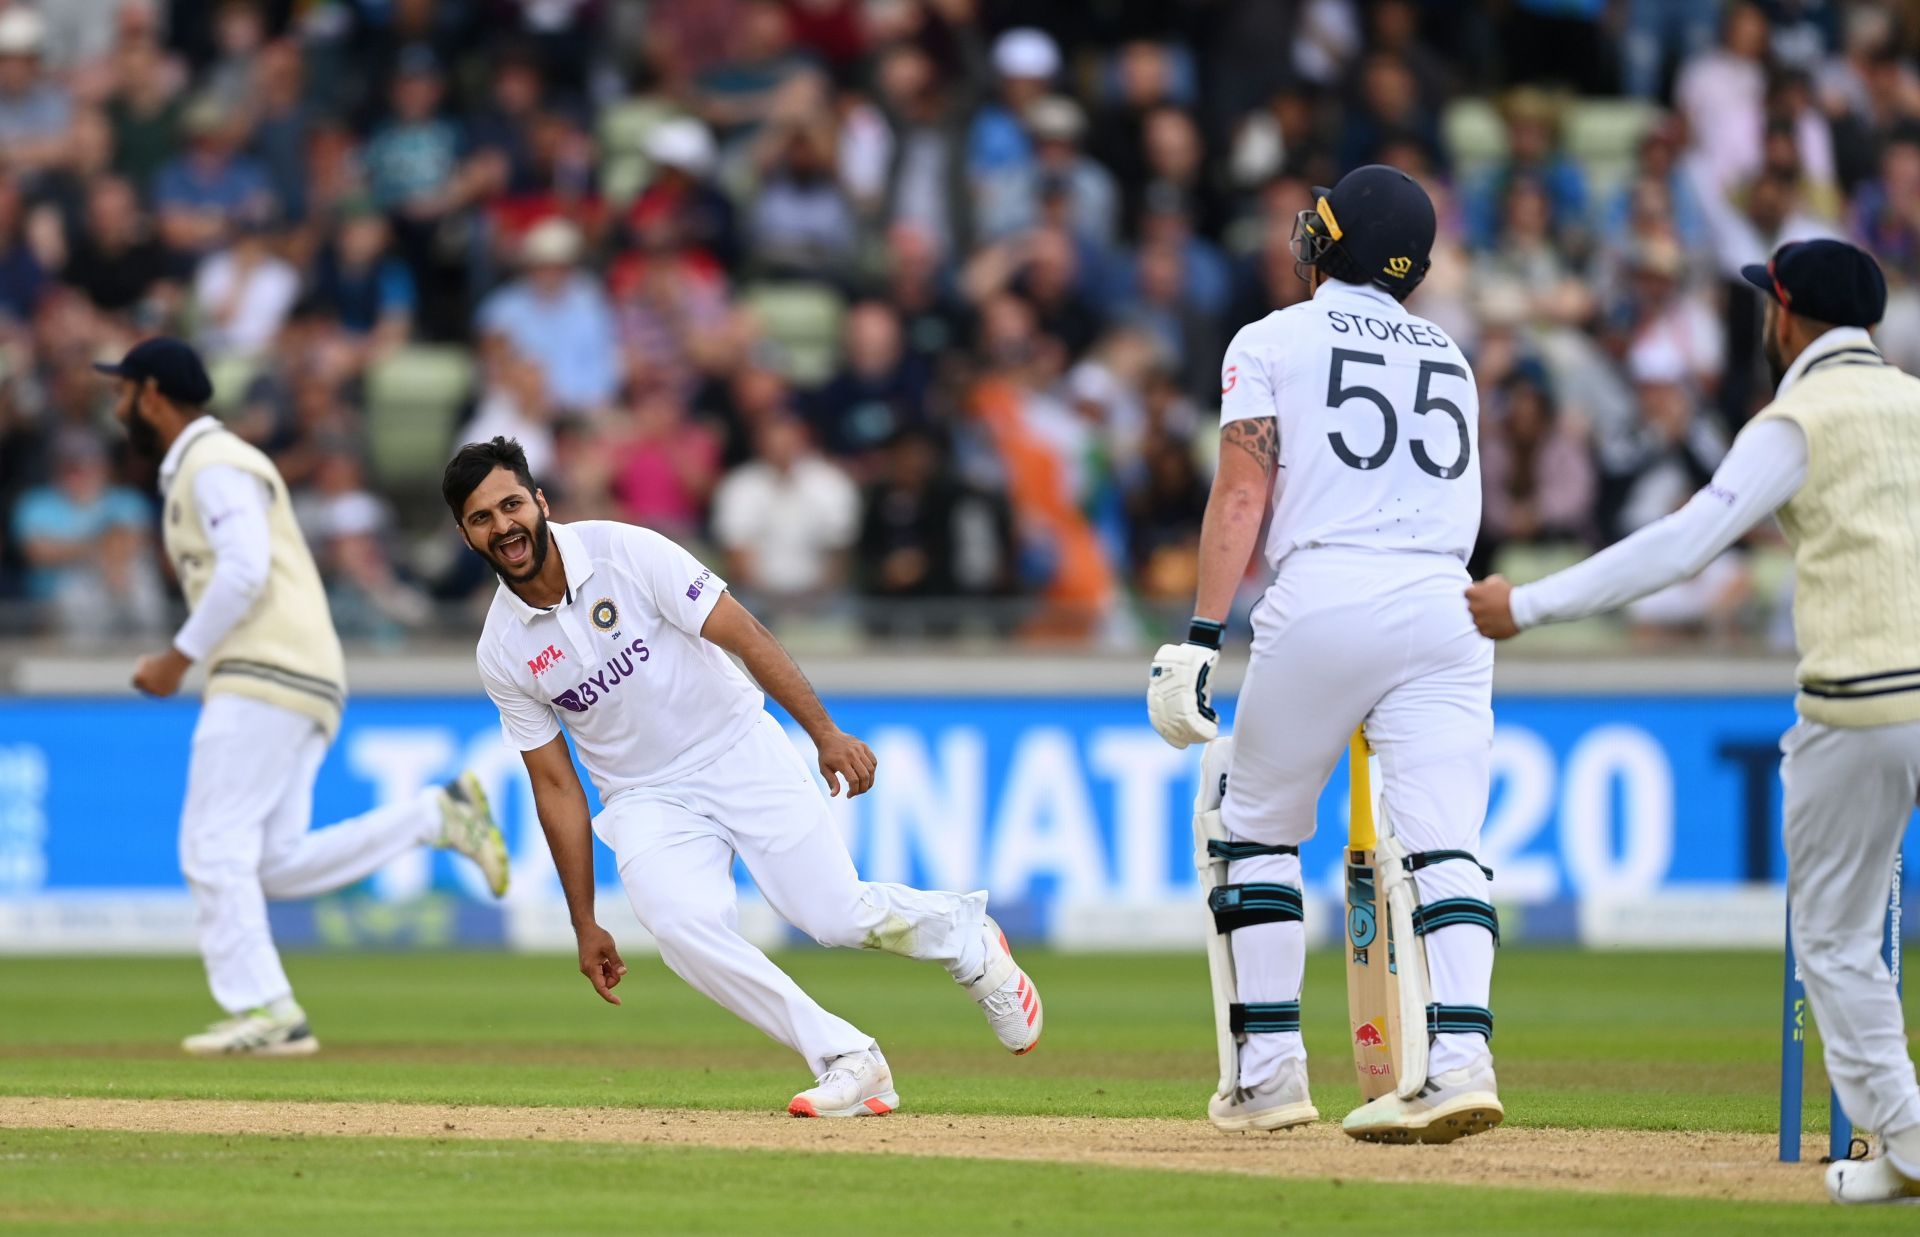 England v India - Fifth LV= Insurance Test Match: Day Three (Image: Getty)